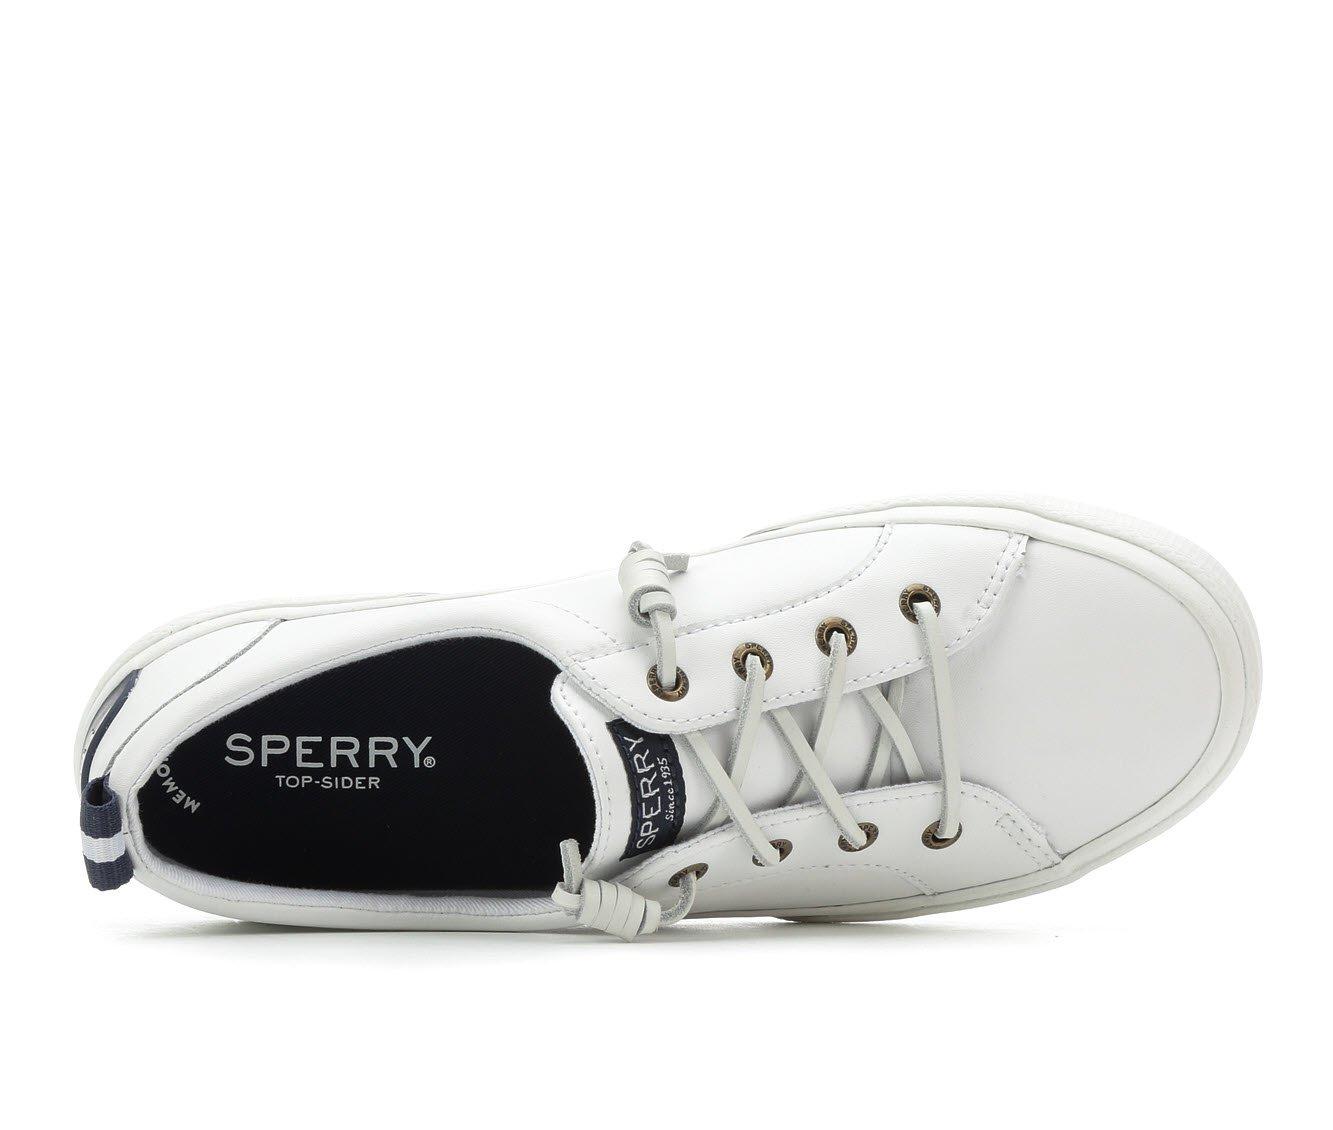 Sperry Women's Sperry Pier Wave Lace to Toe Leather Slip-On Shoes